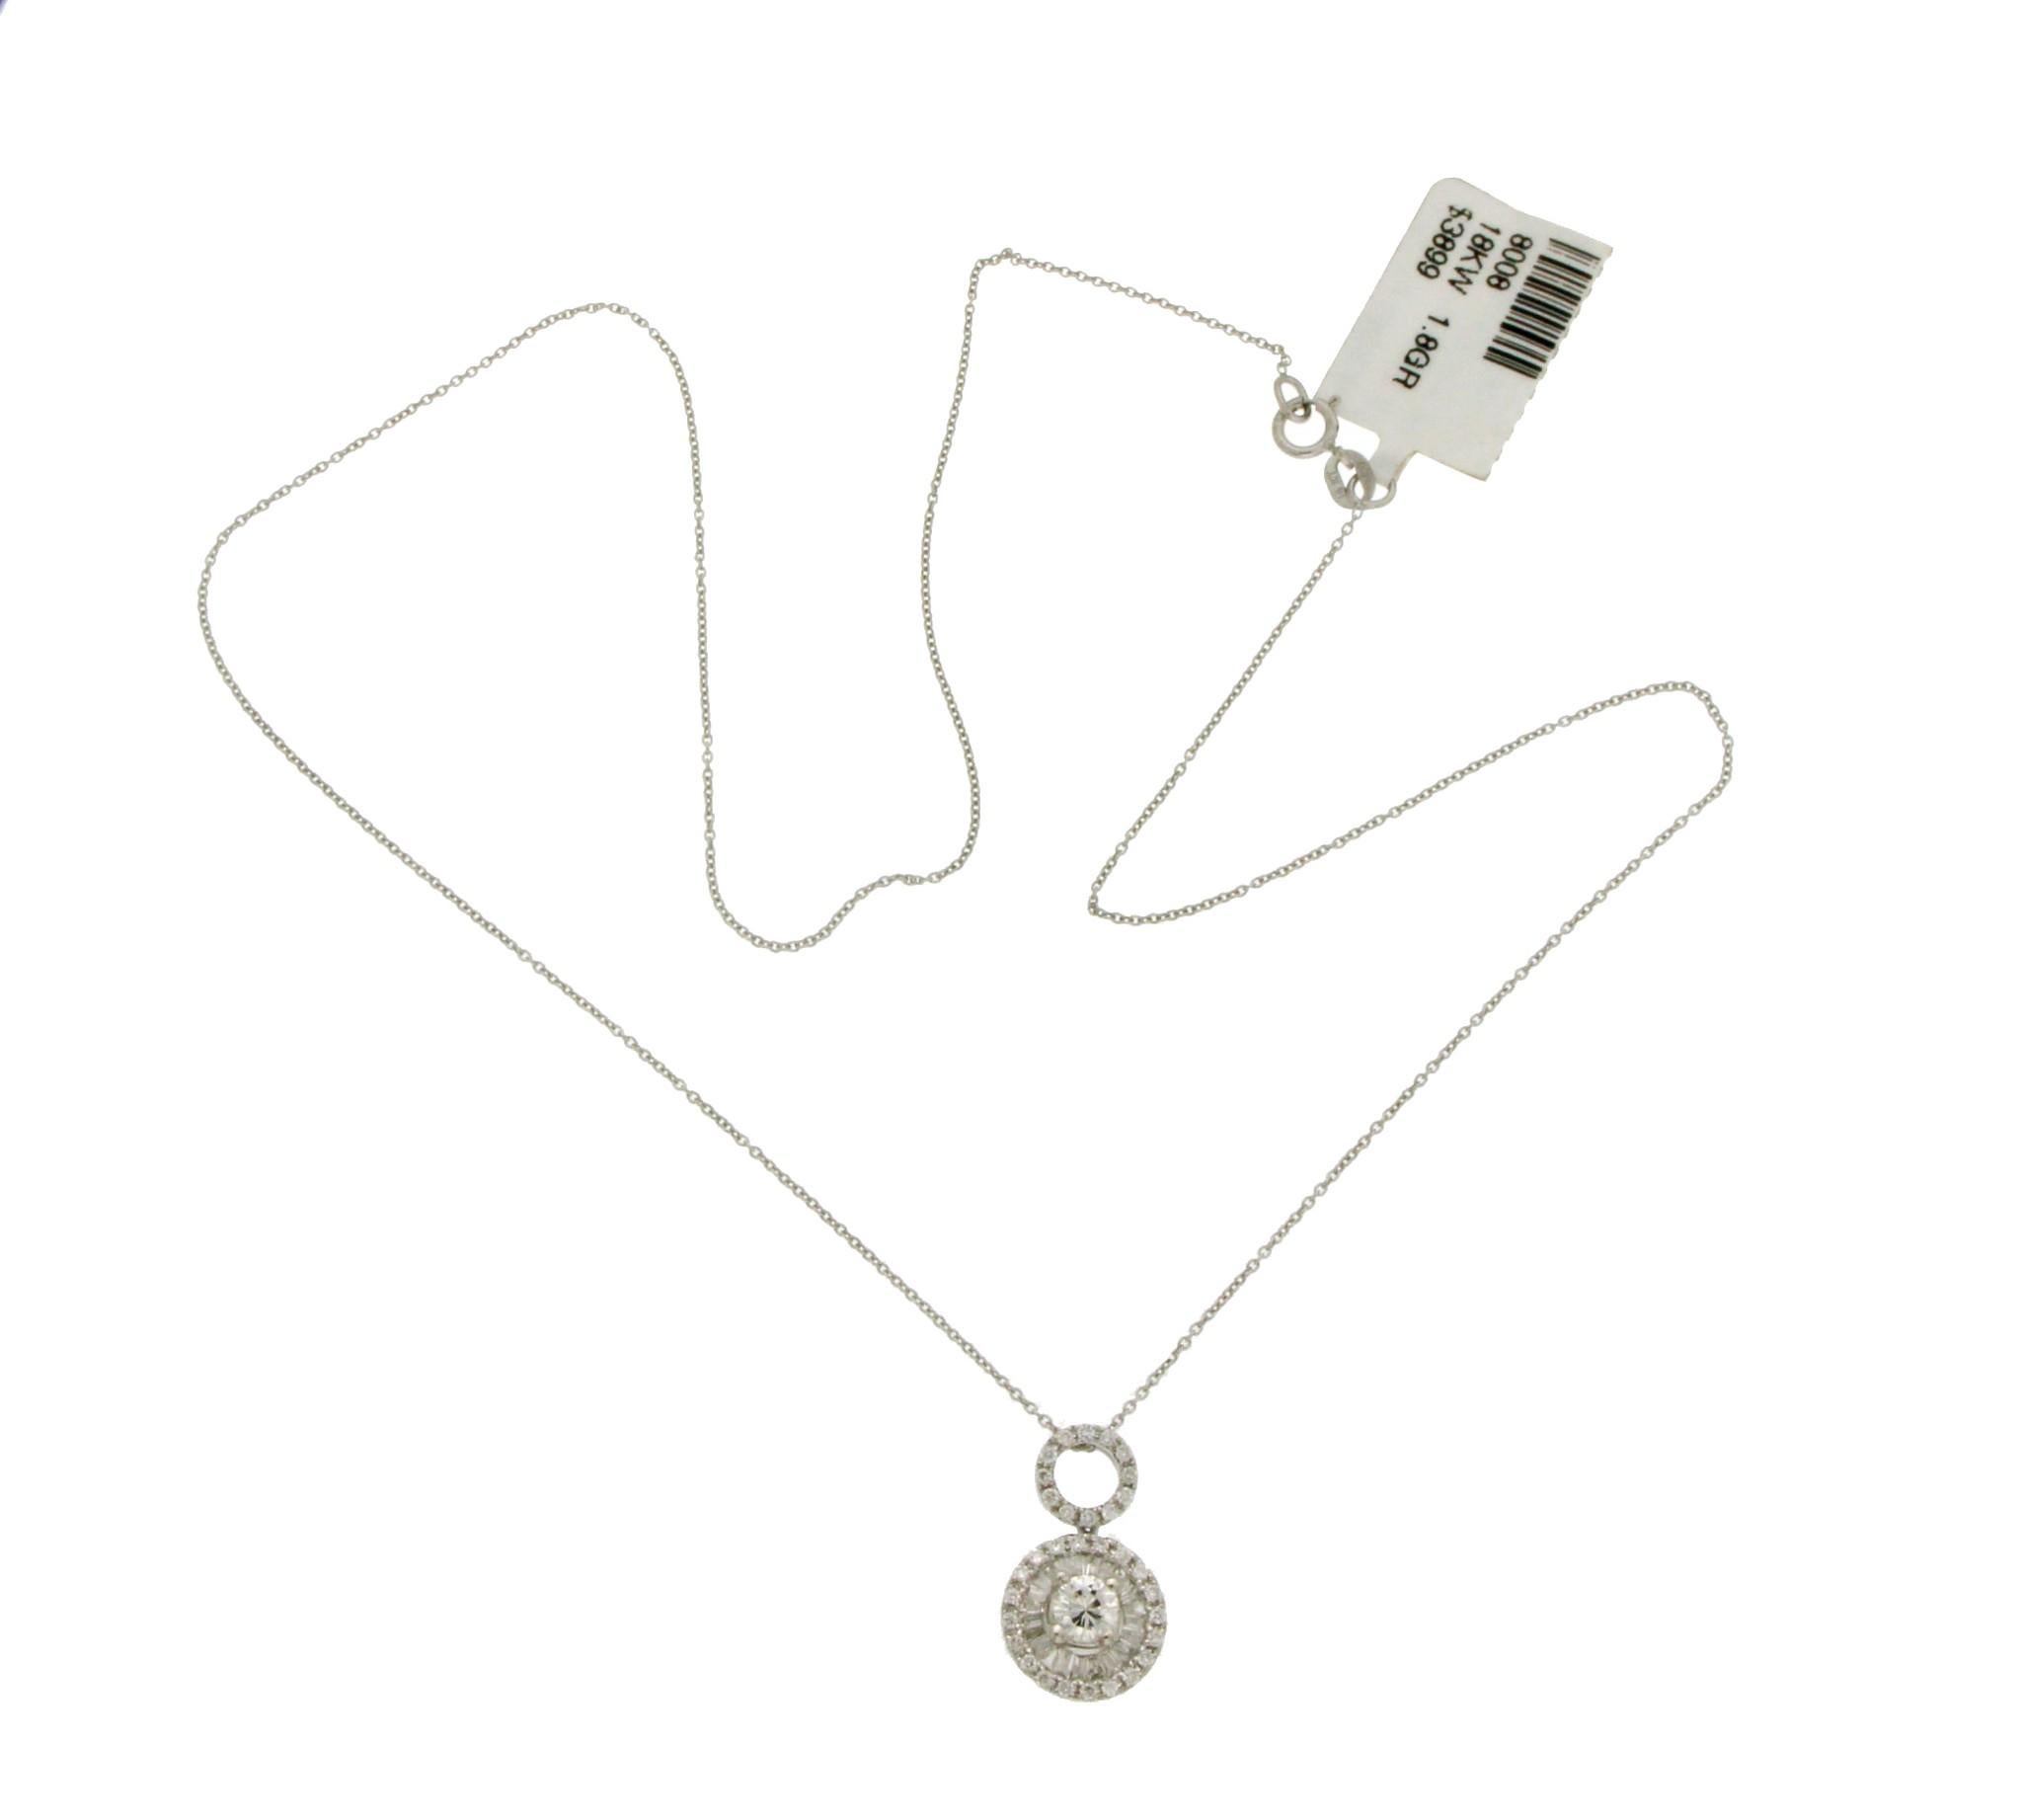 Type: Necklace 
Wearable Length: 16